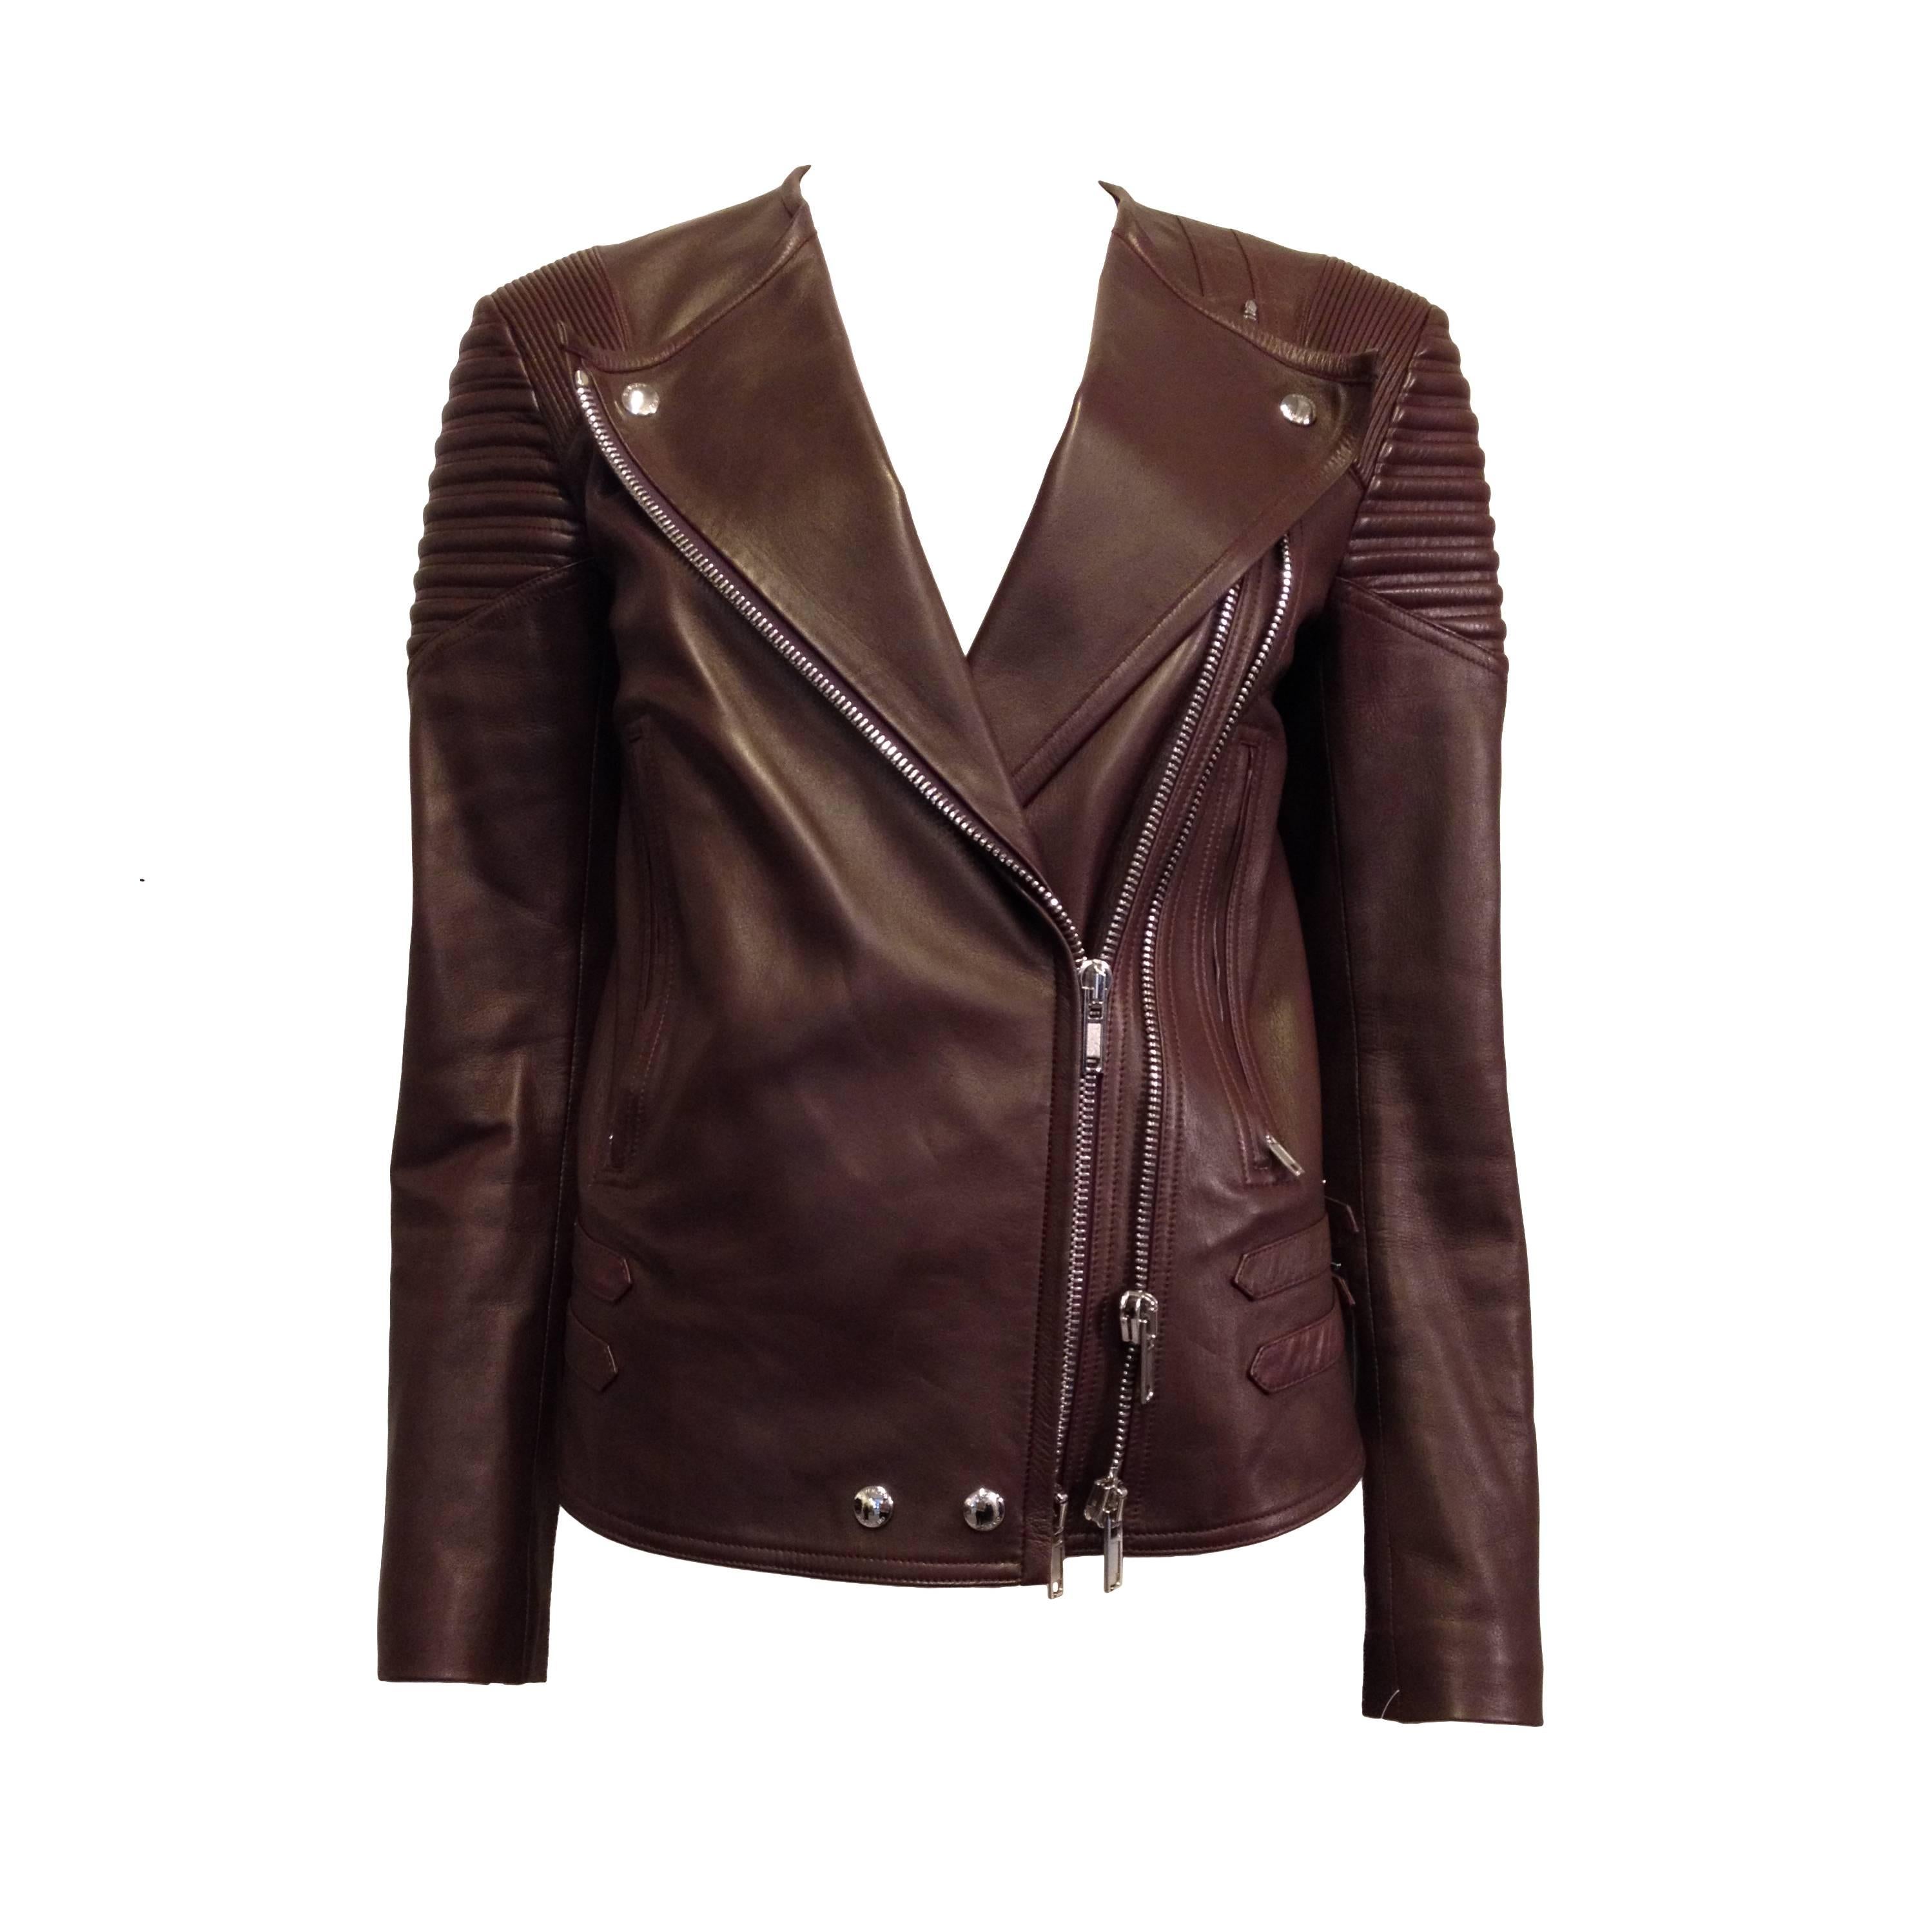 Givenchy Burgundy Ribbed Leather Motorcycle Jacket Size 38 (6) For Sale